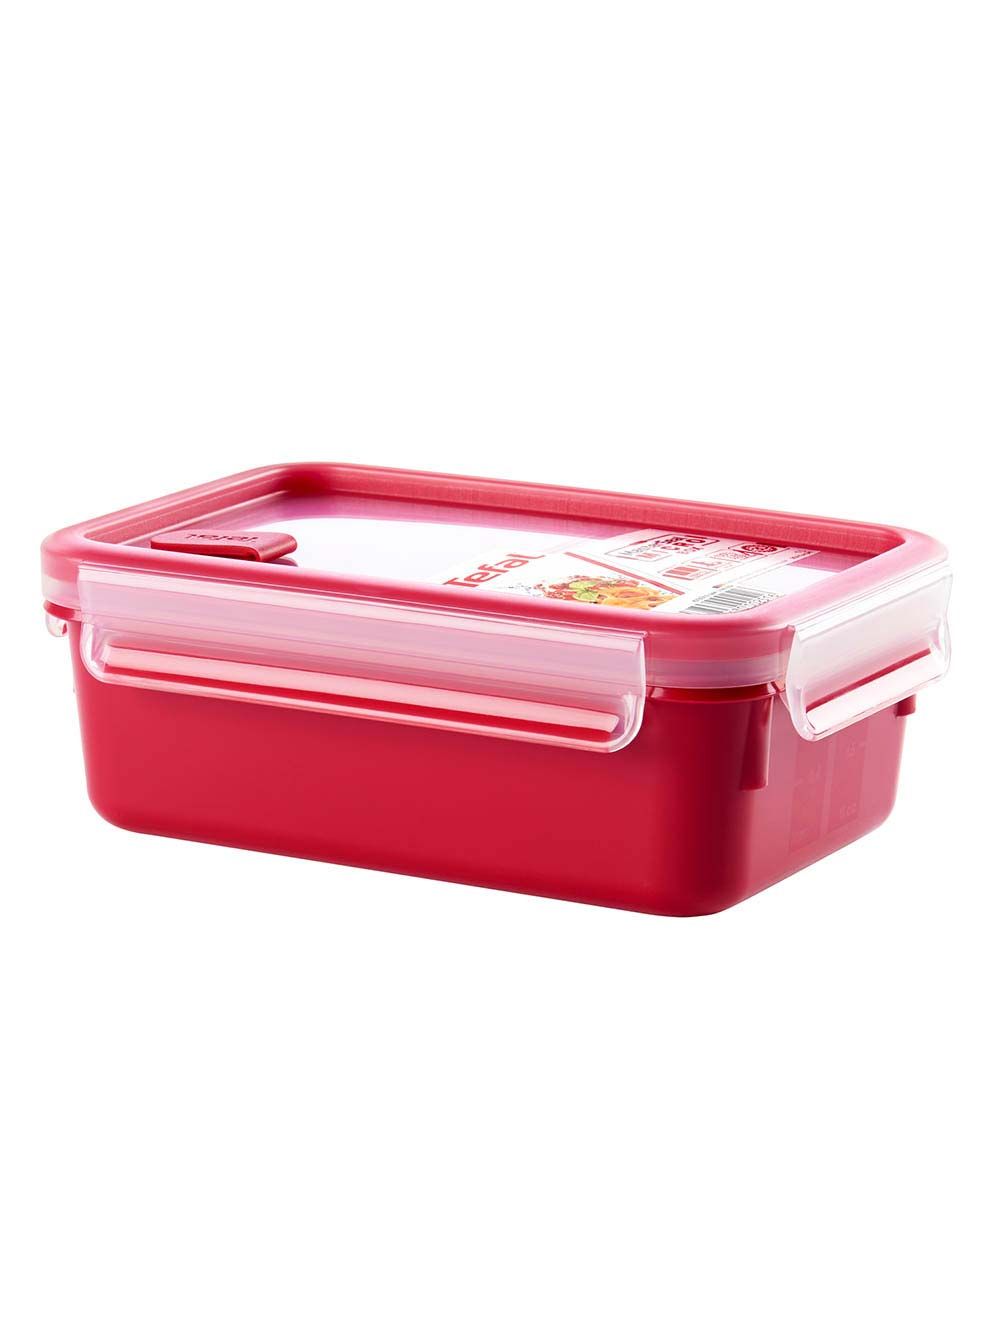 Tefal Master Seal Micro Box 1 Litre Food Container with Inserts, K3102312